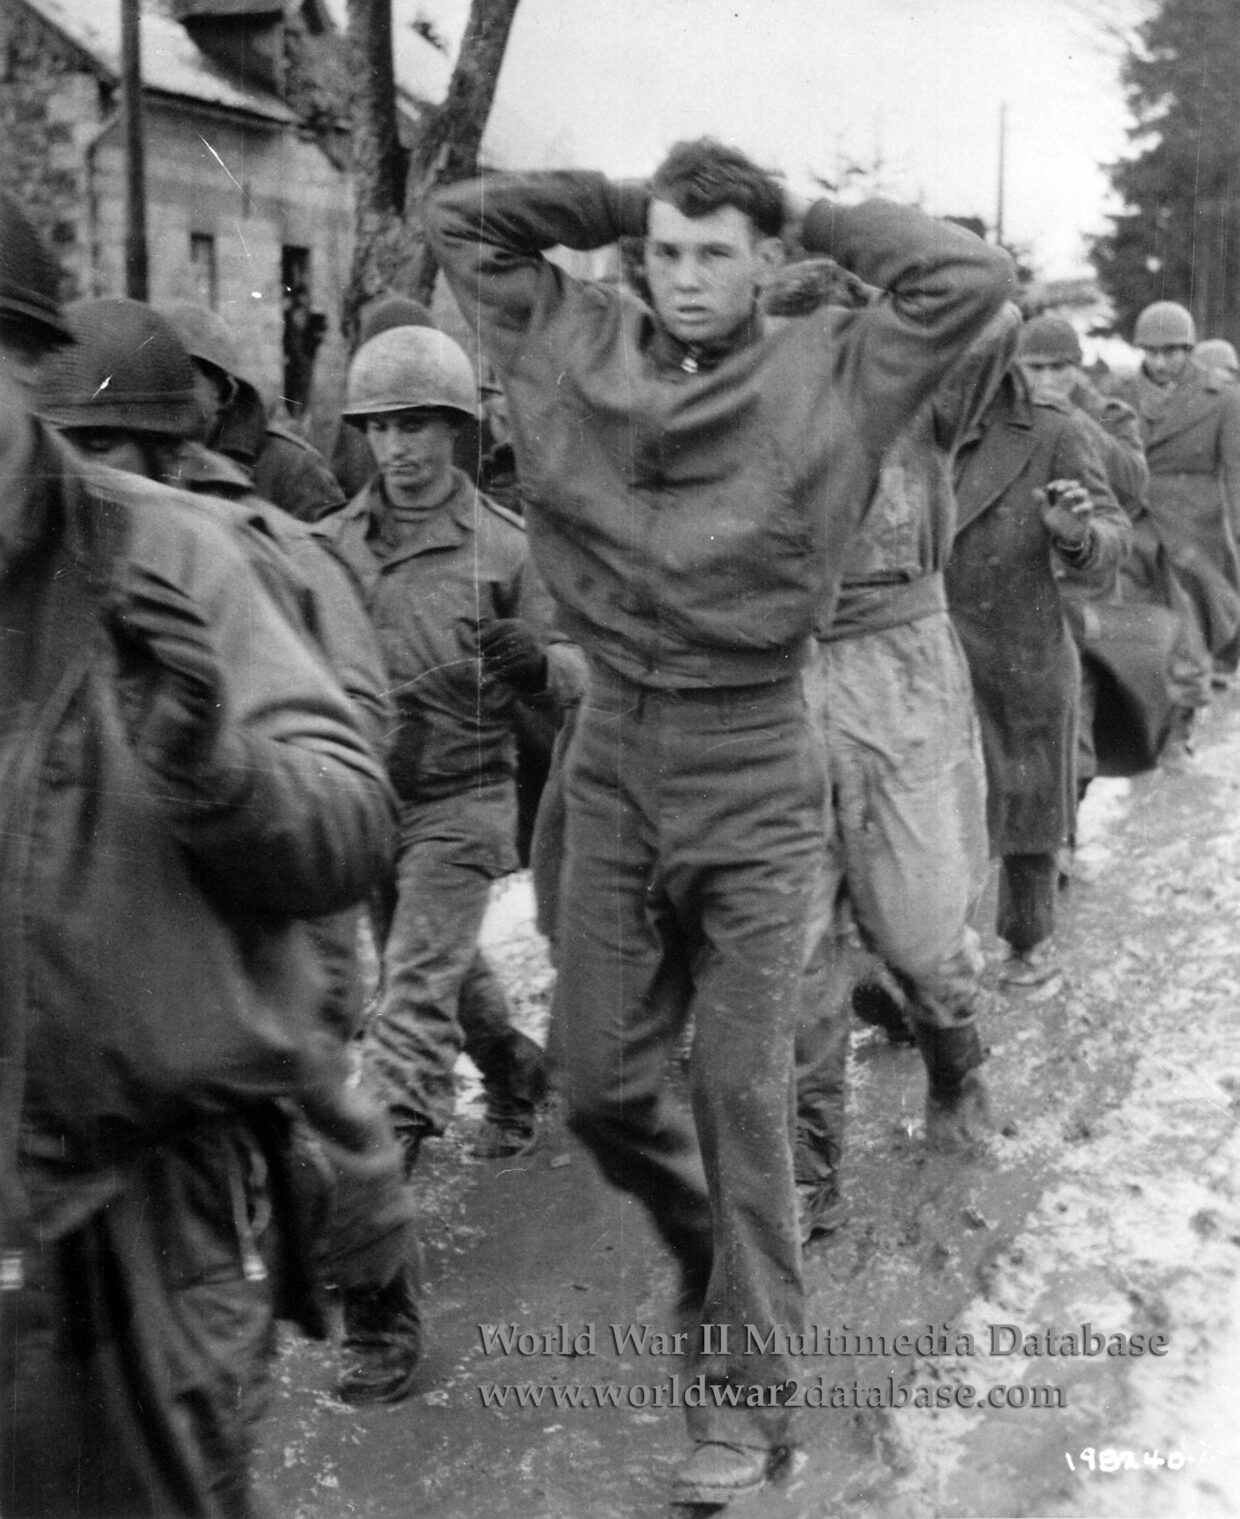 American Soldiers of the 99th Infantry Division March Into Captivity